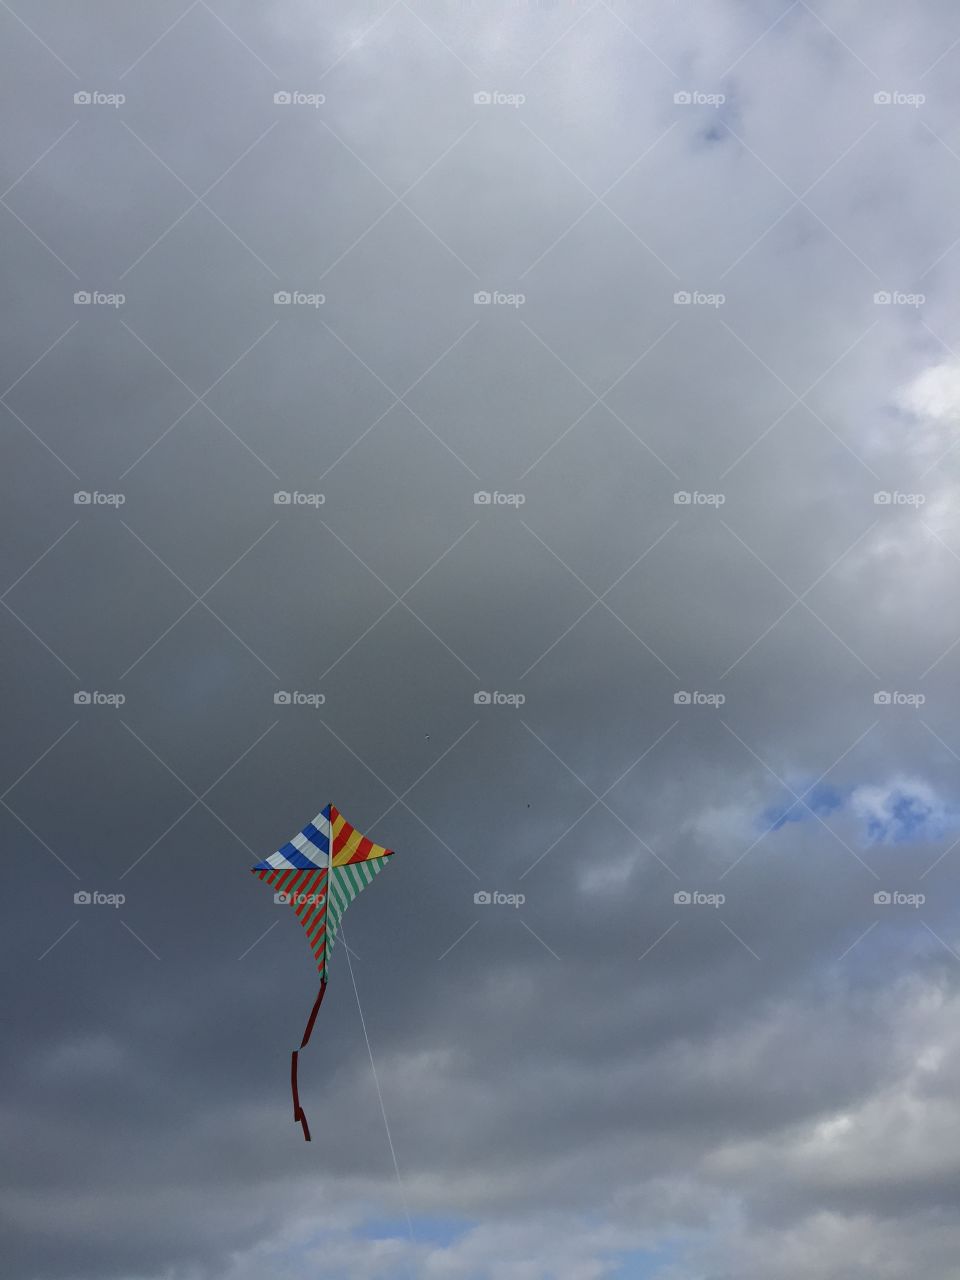 Kite in front of clouds